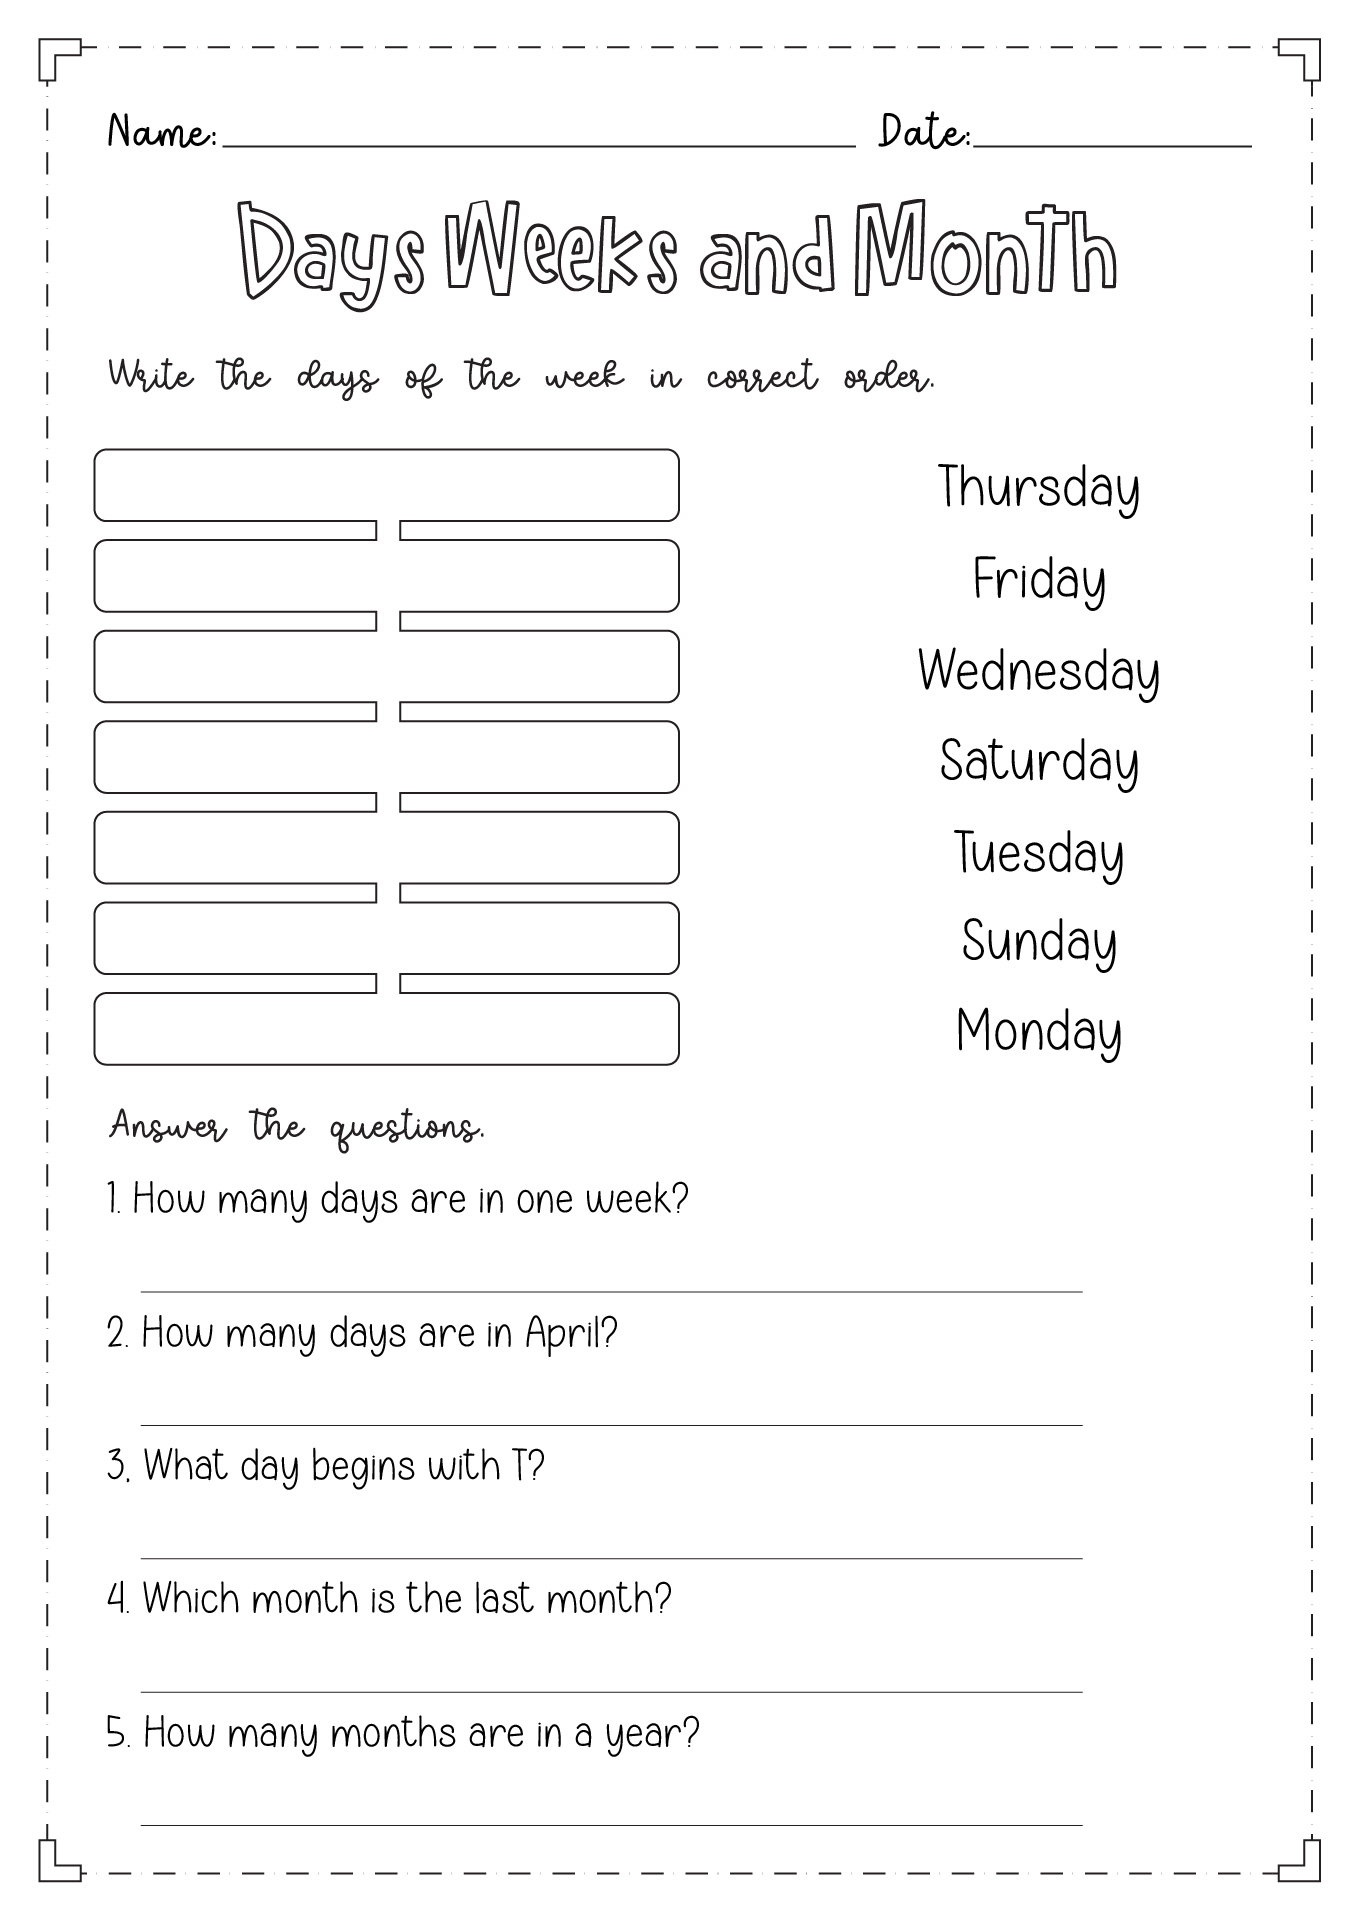 Days Weeks and Month Worksheets Image